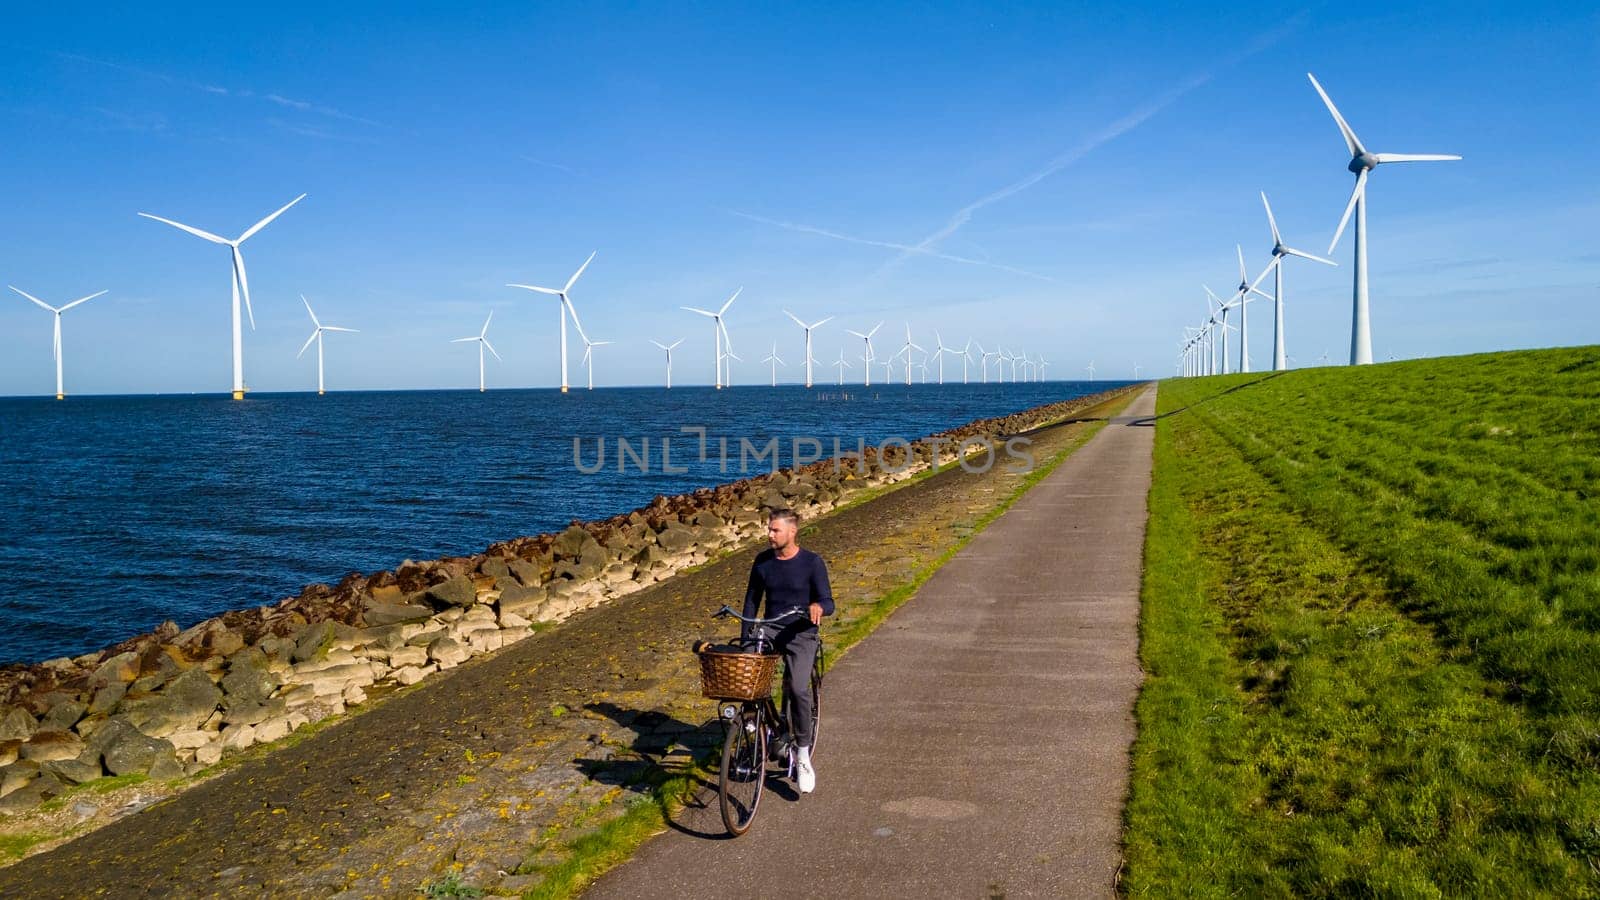 A man gracefully rides a bike along a path next to a tranquil body of water in the scenic landscape of Netherlands Flevoland in Spring by fokkebok